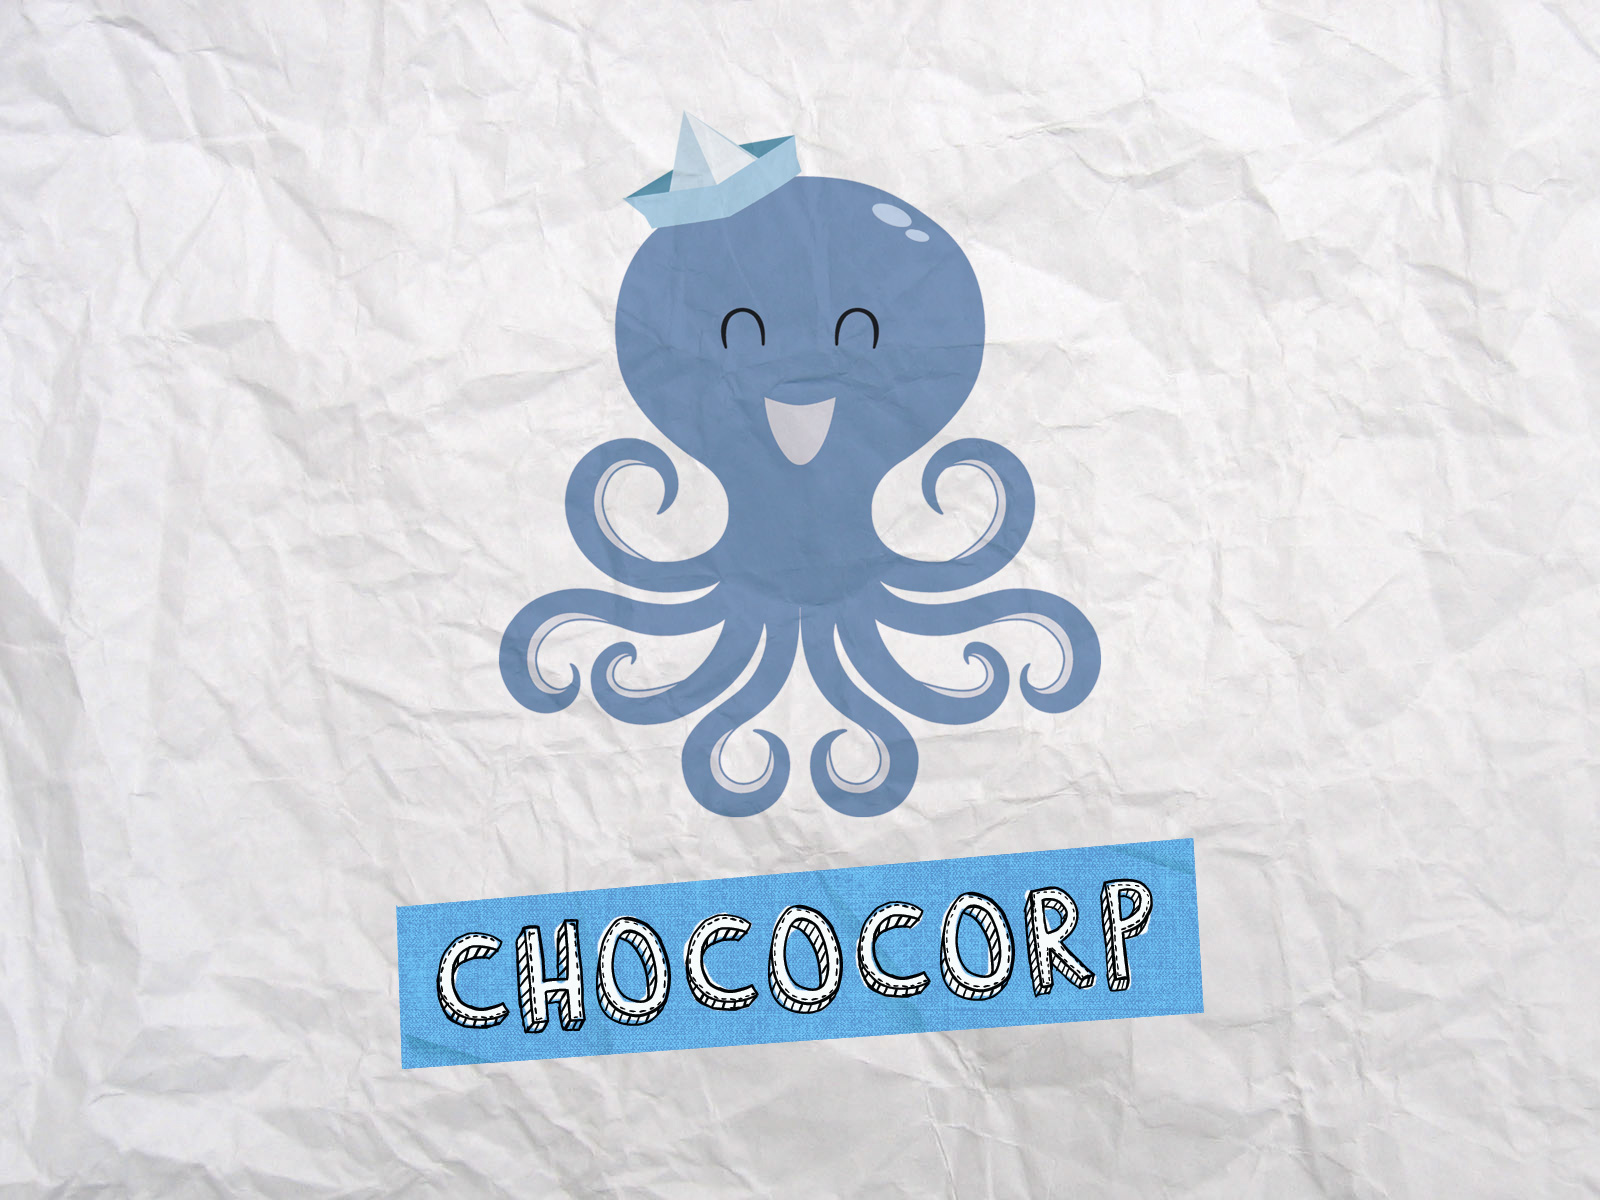 ChocoCorp Games